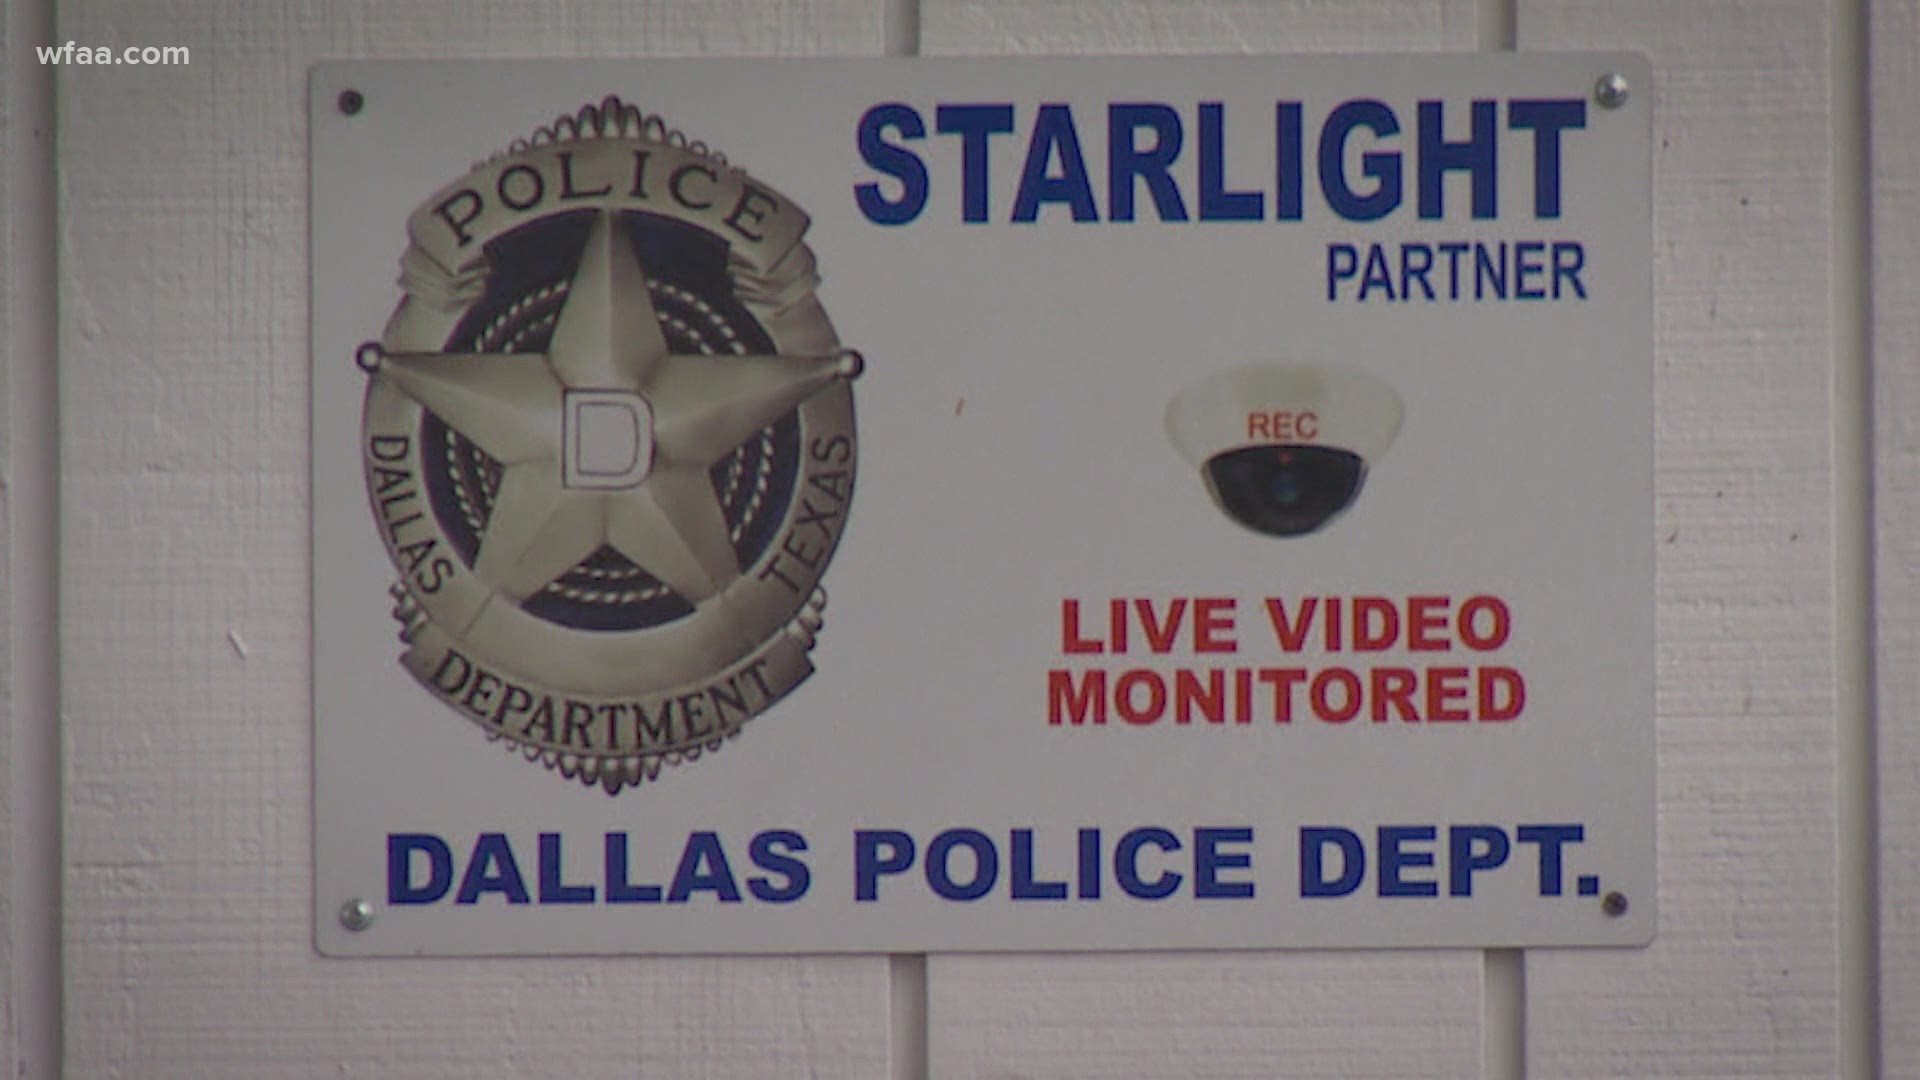 The Dallas Police Department hopes the expansion will help catch more criminals.